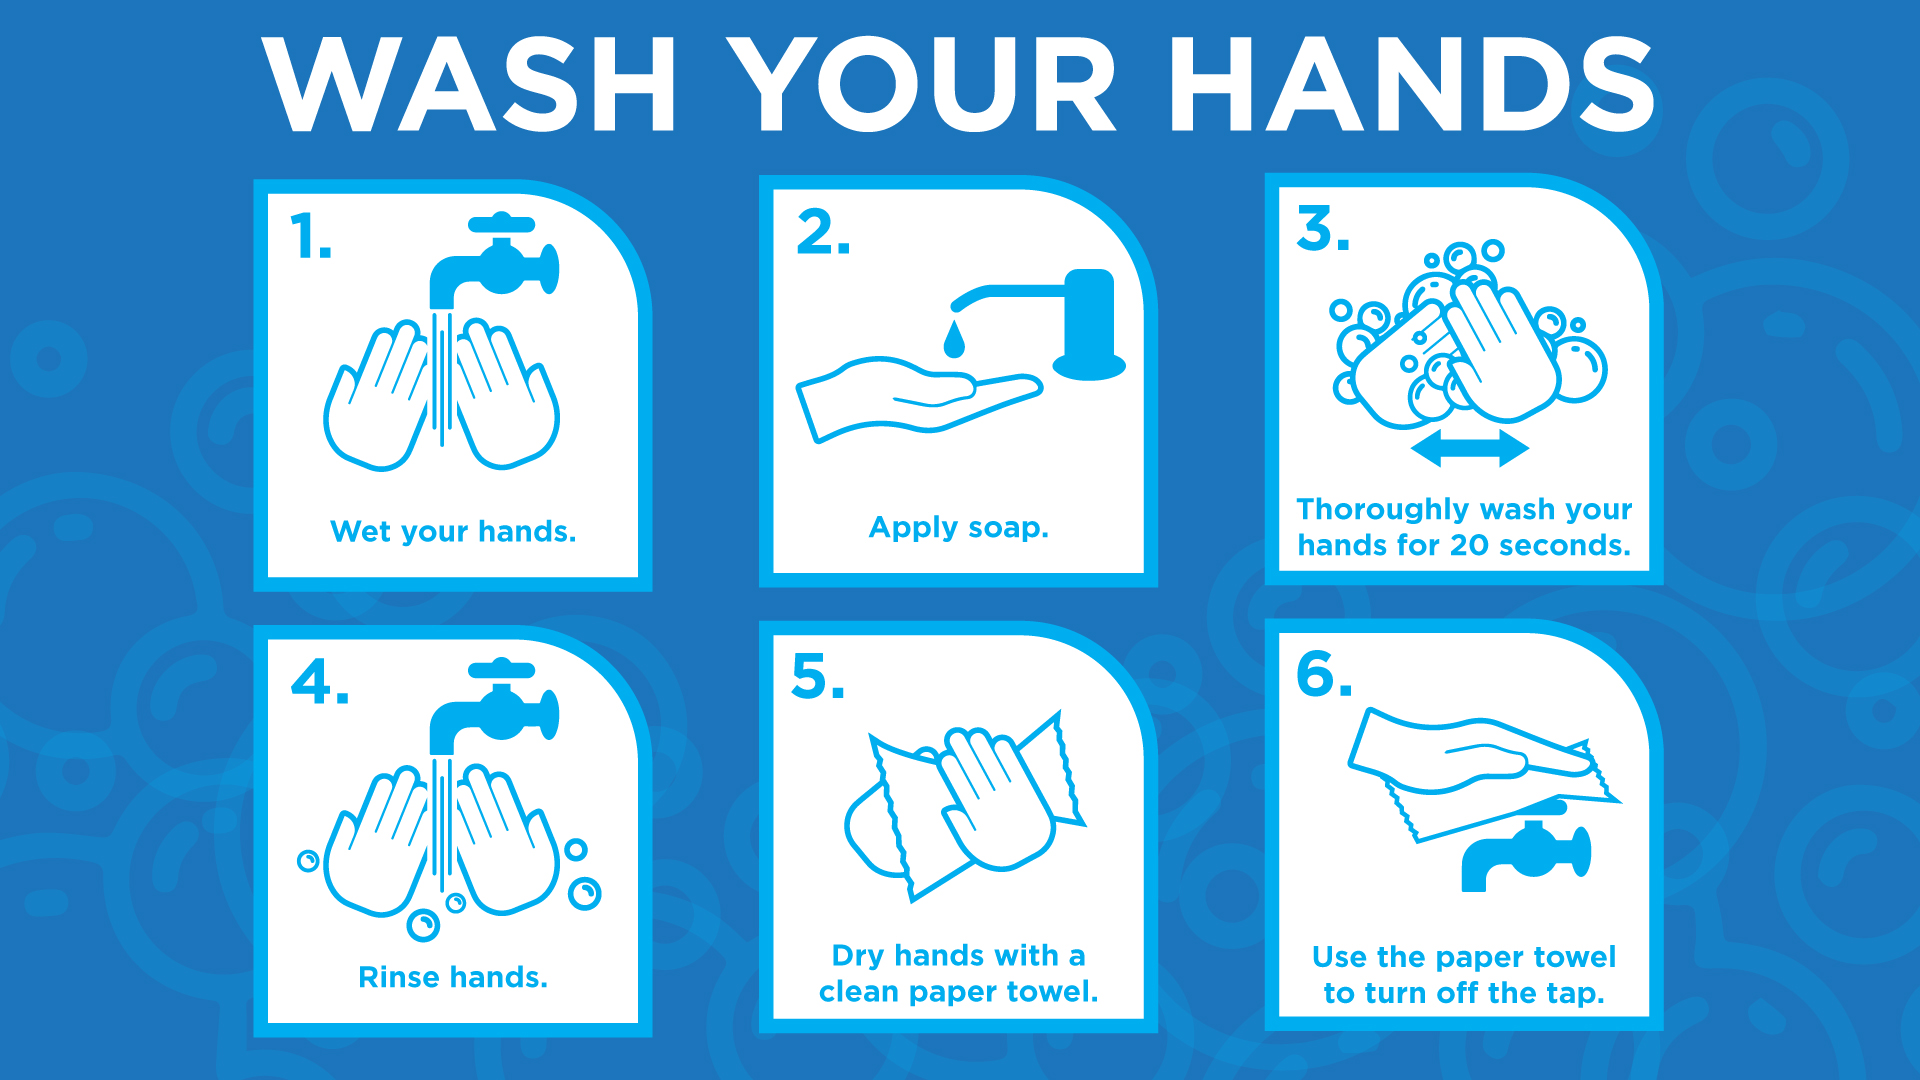  Wash Hands Poster 24x12", printed on White FoamCore